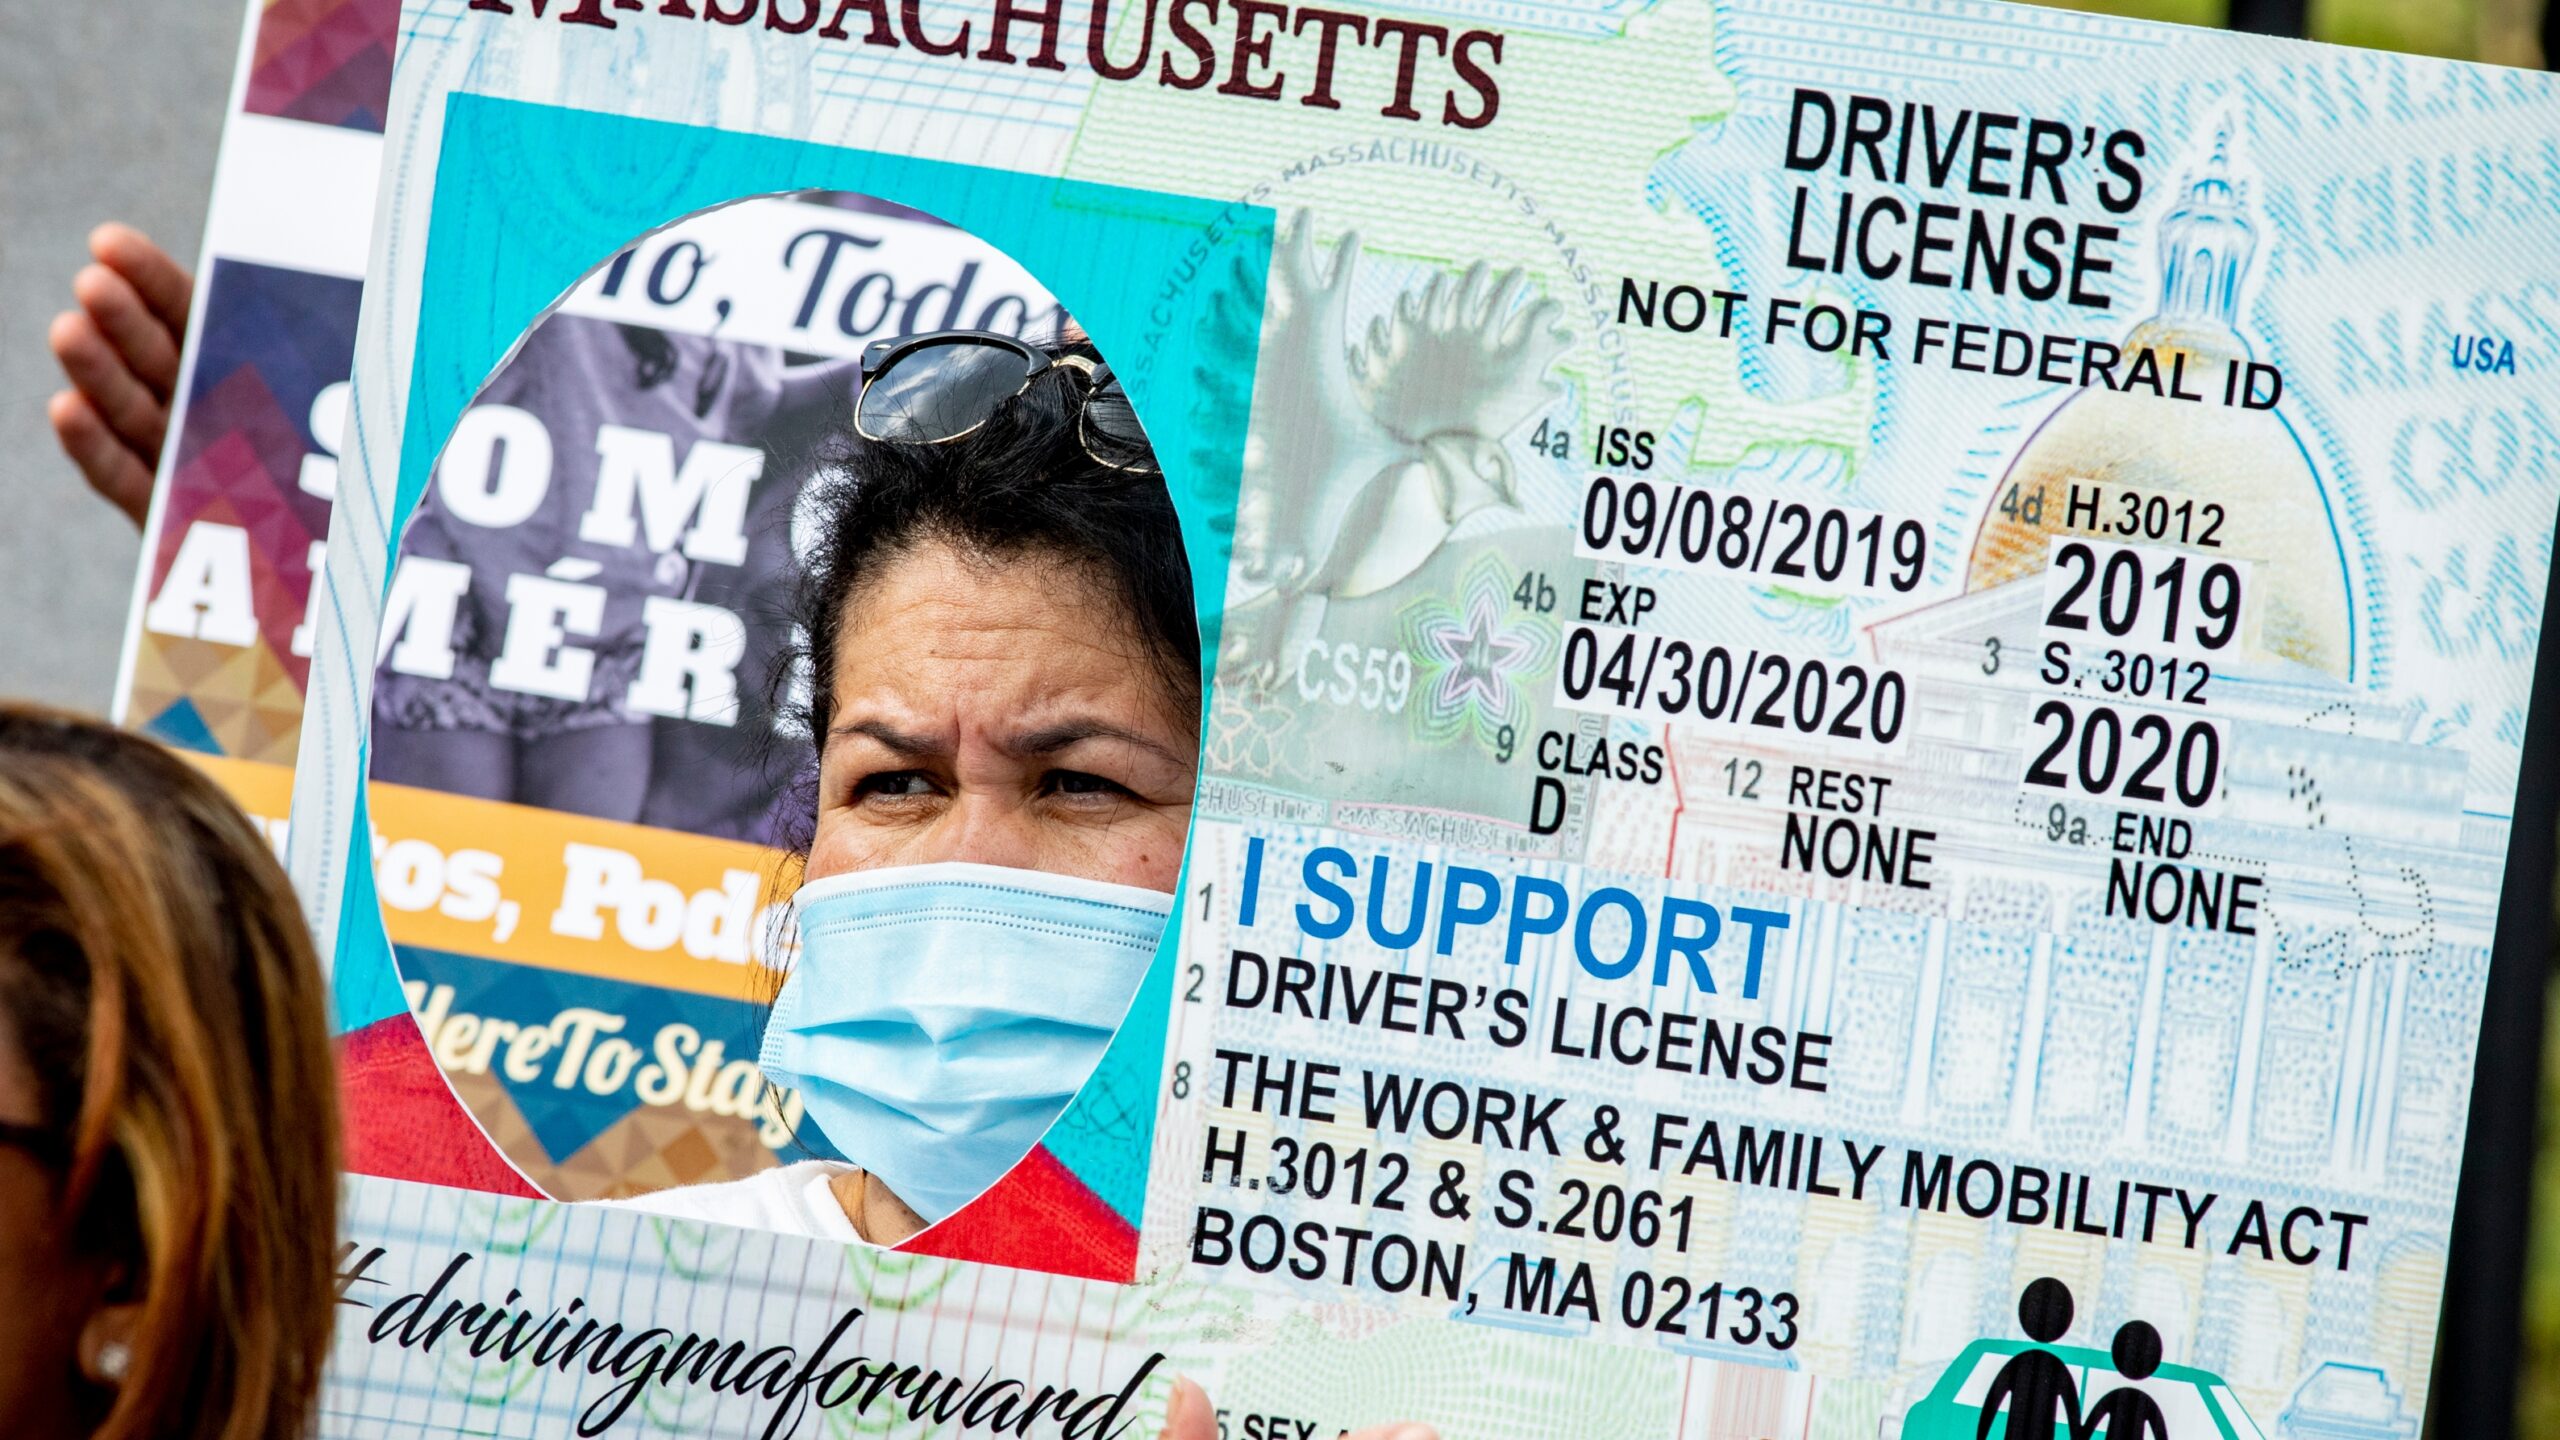 Driver's licenses for immigrants without legal status in Massachusetts  becomes law; Beacon Hill overrides Gov. Charlie Baker's veto 